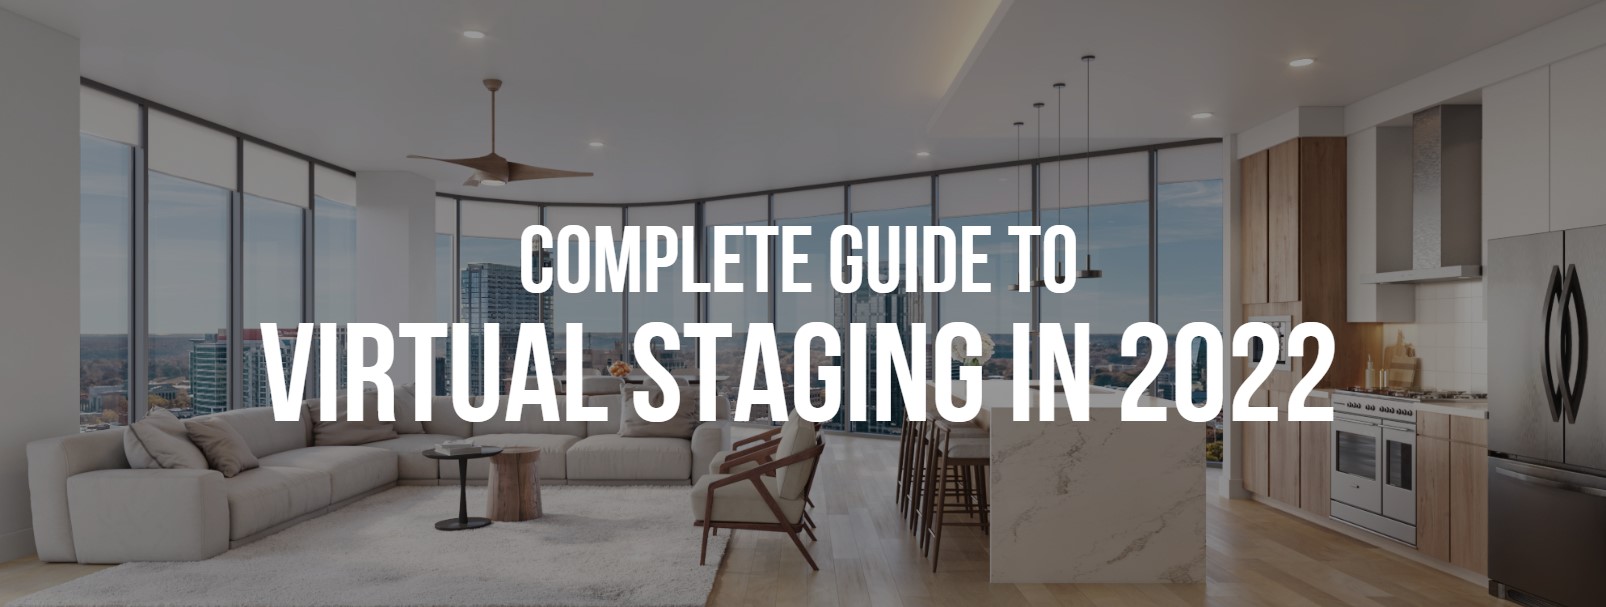 Complete Guide To Virtual Staging 2020 Hero Image 1